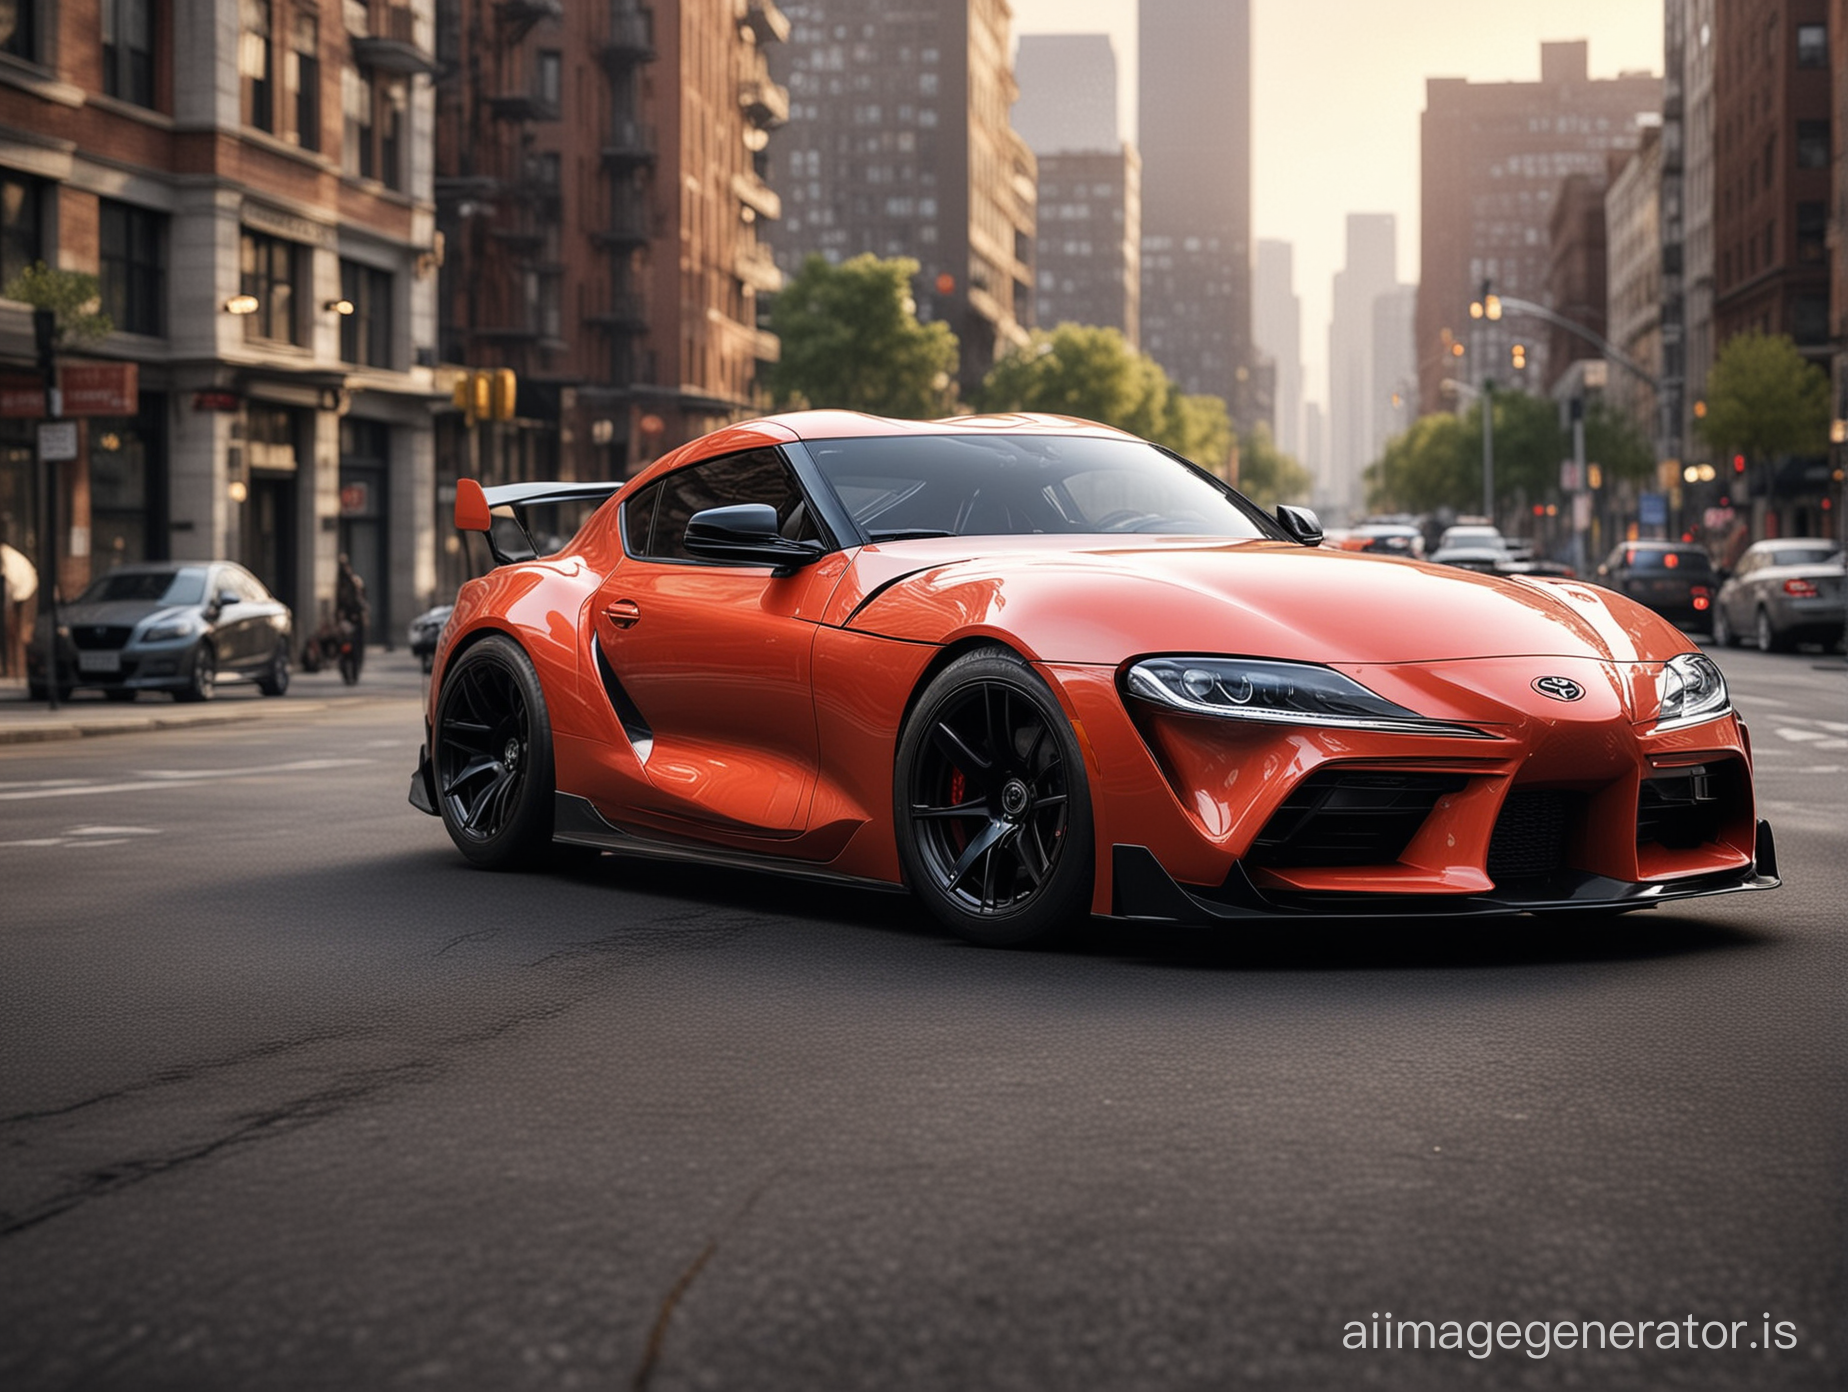 If the toyota supra was designed in the 20s, modern city background, natural light, realistic picture